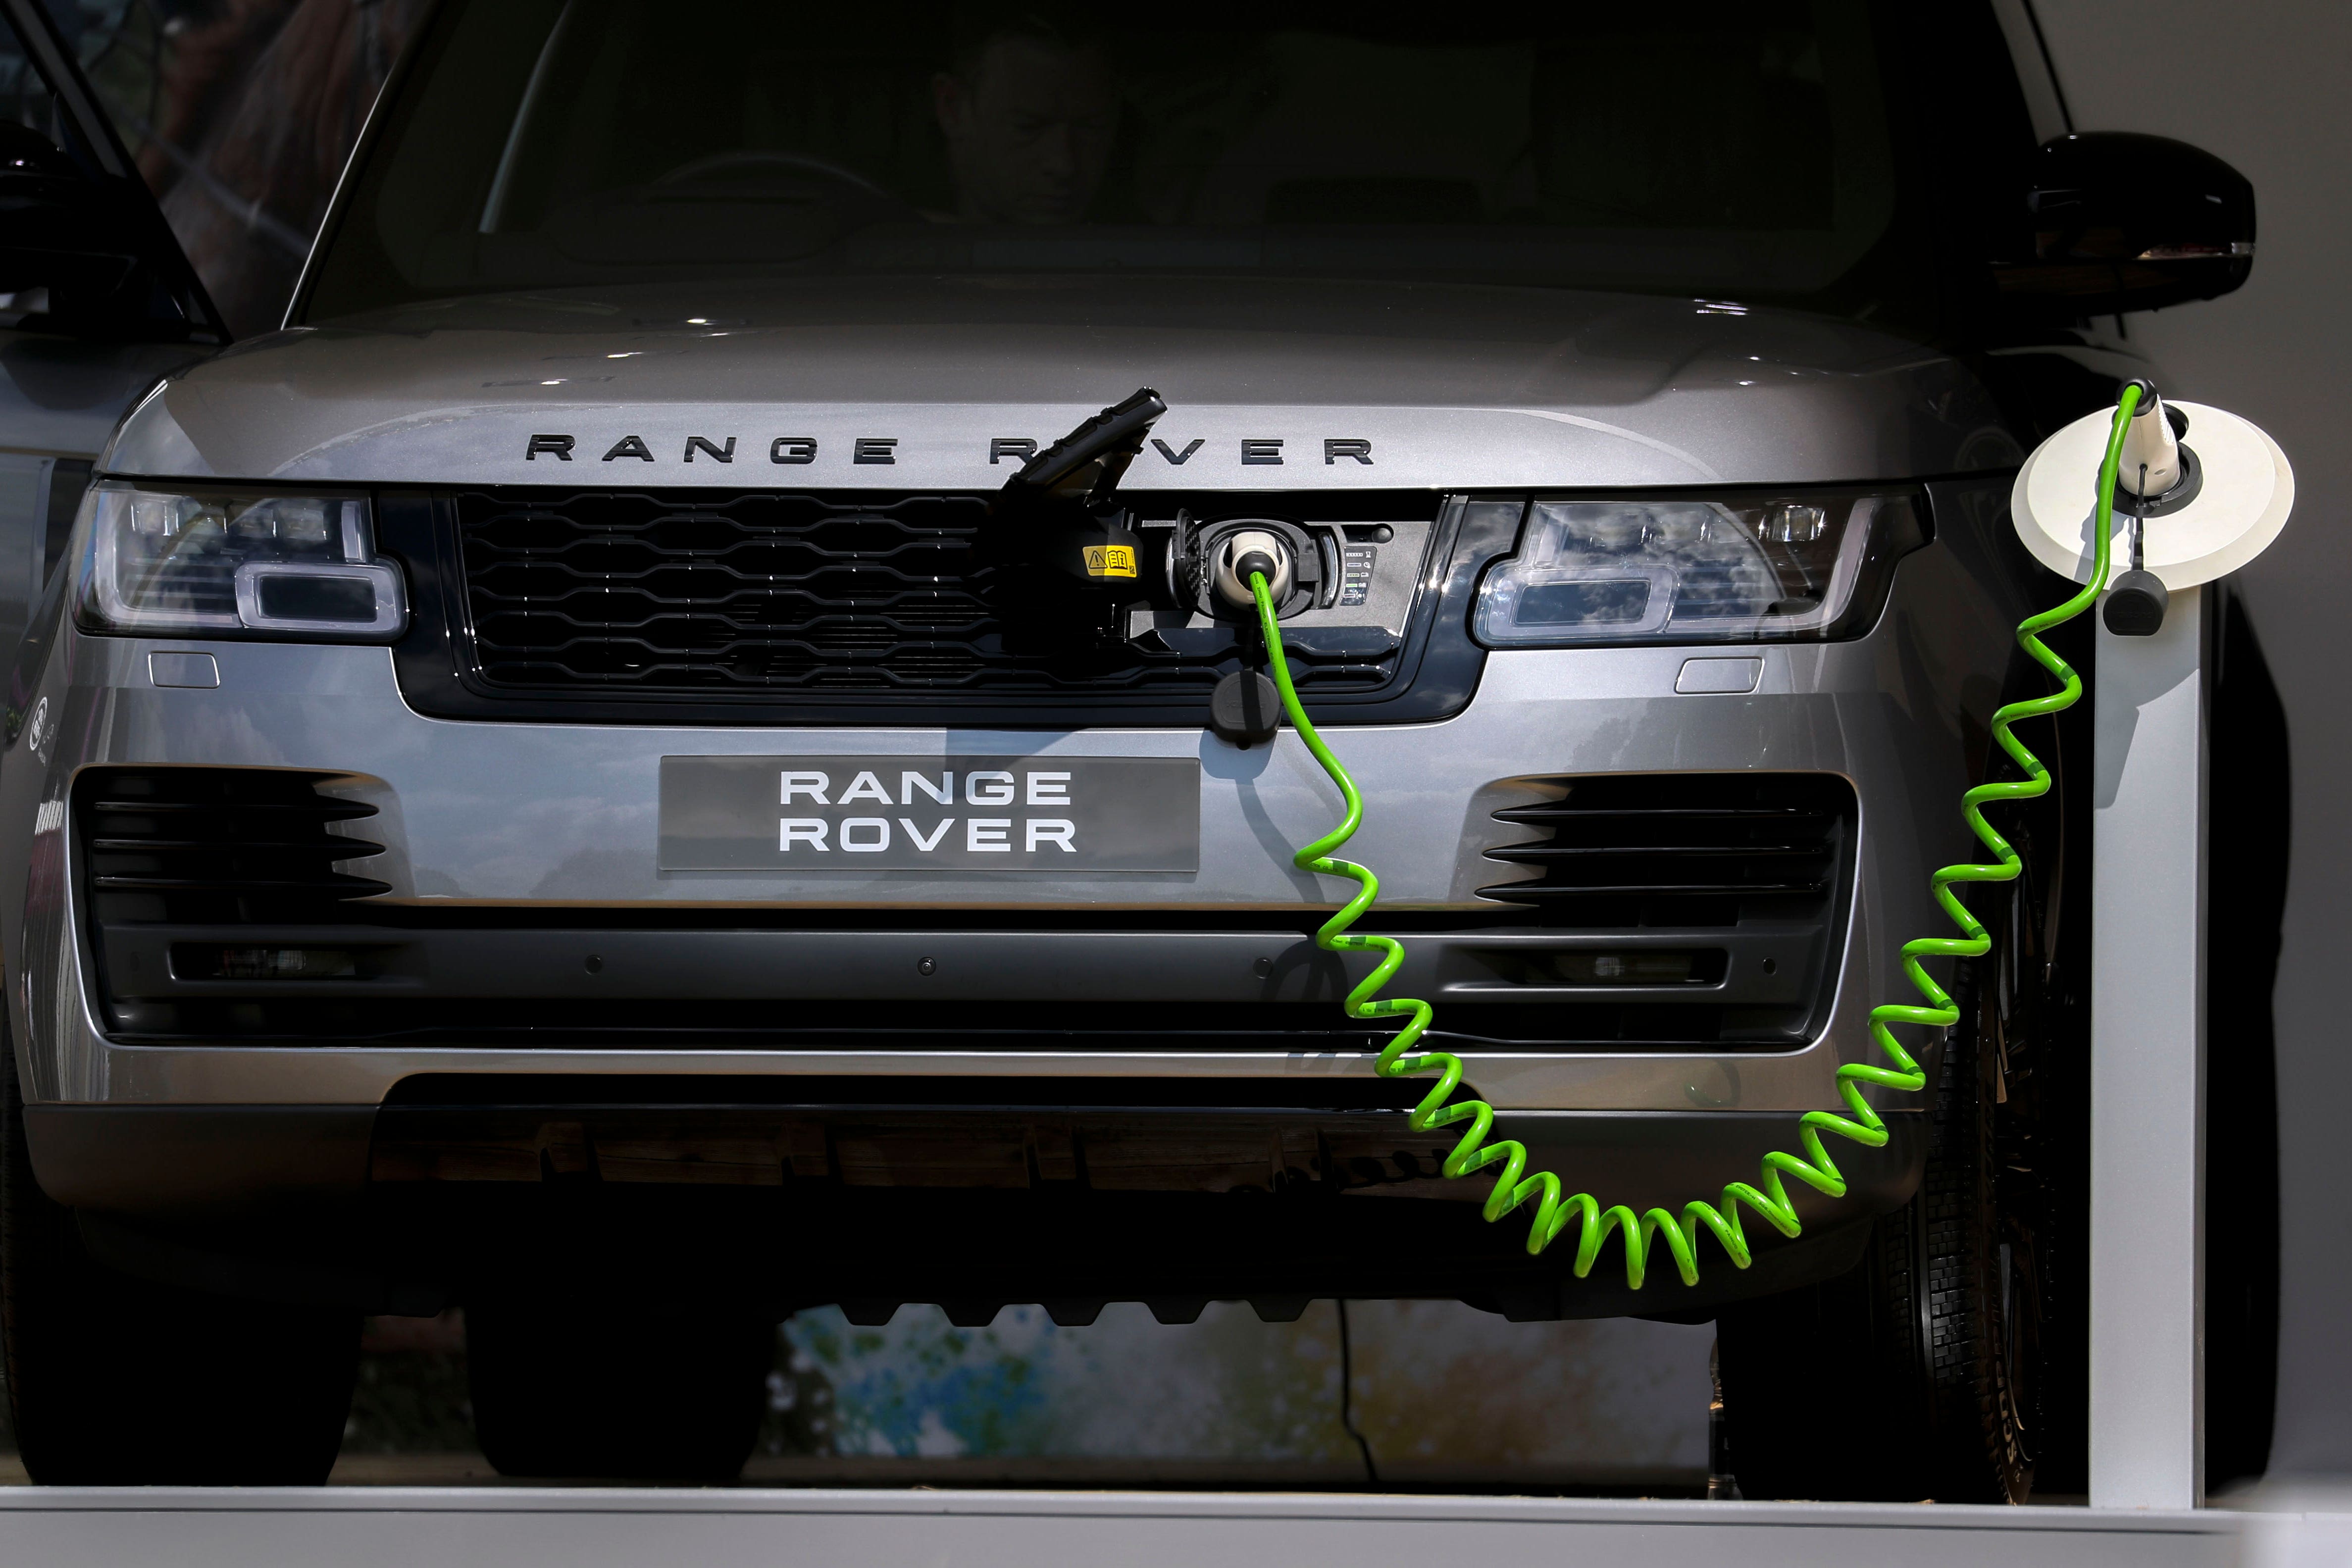 Jaguar Land Rover hit back at claims its vehicles were the most stolen across the UK